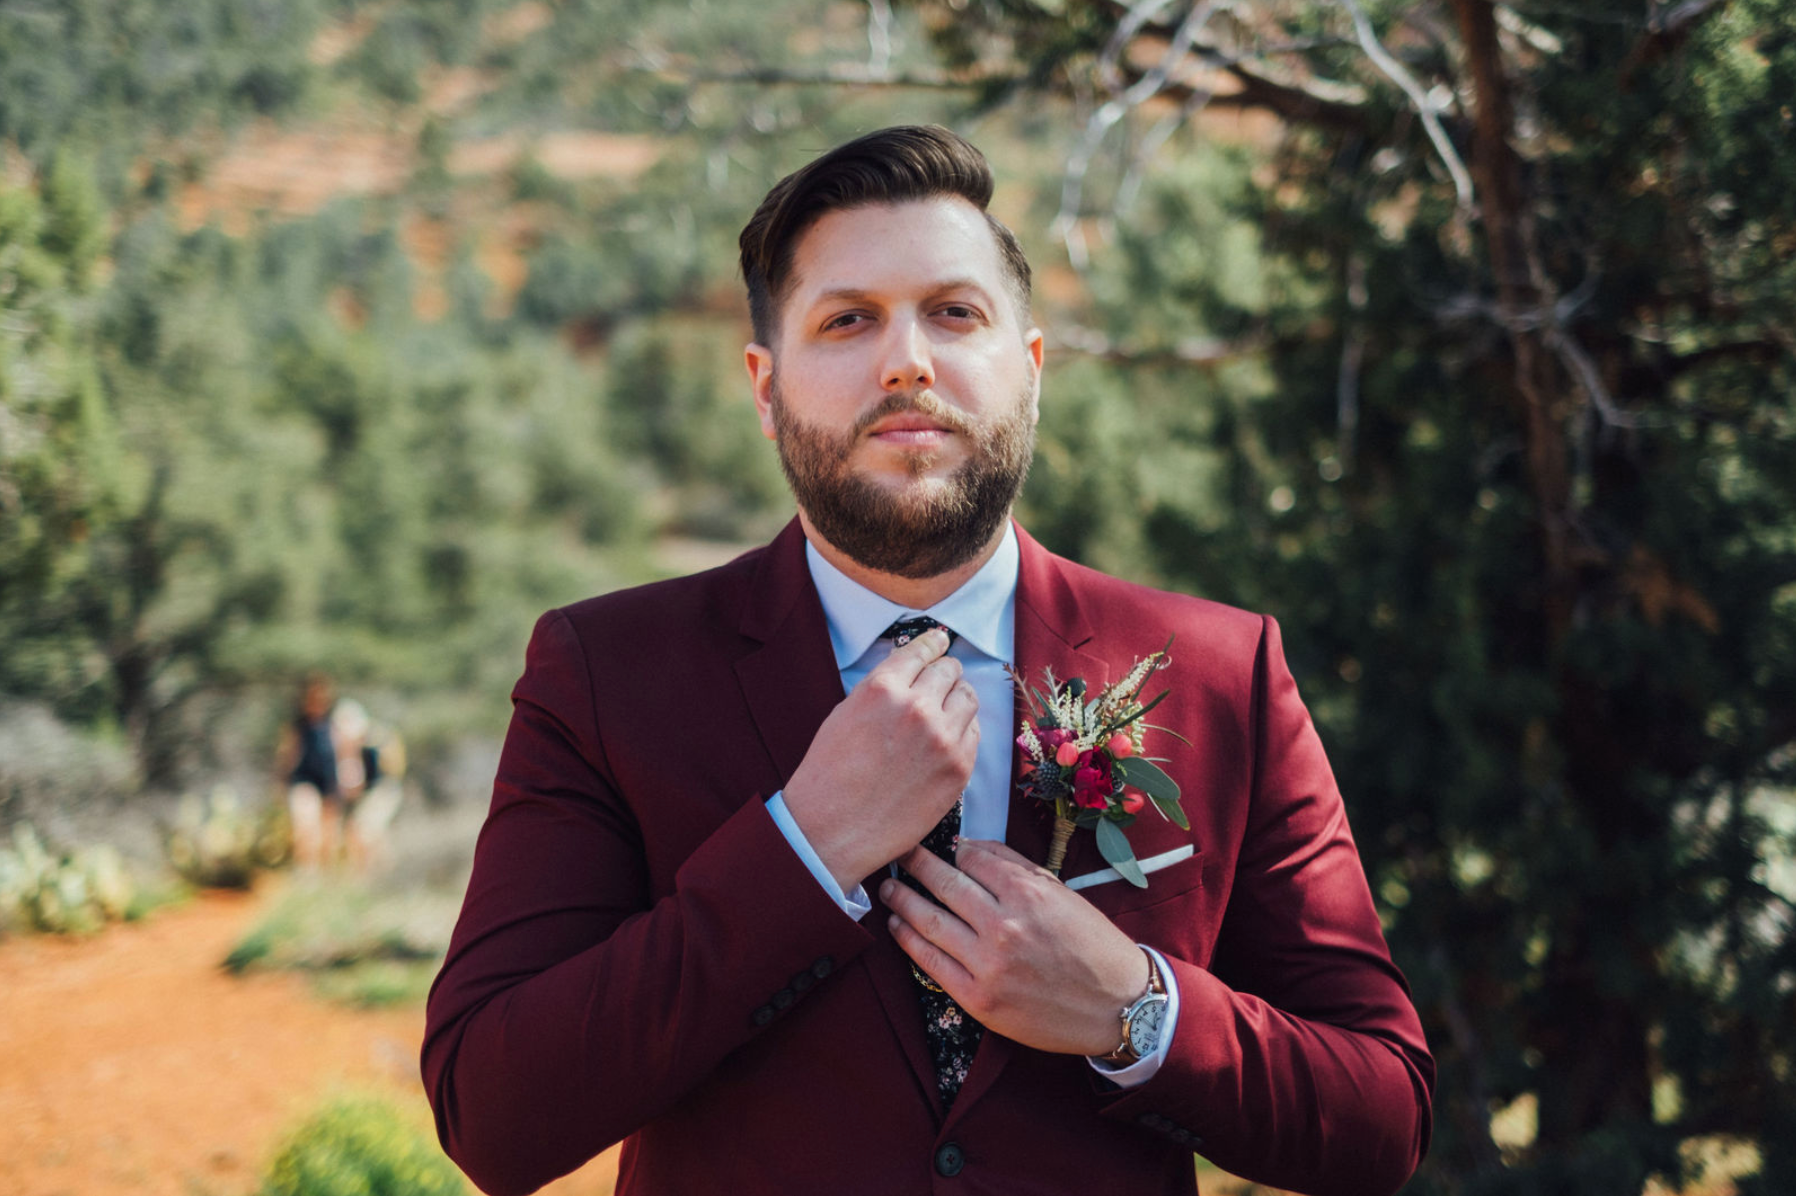 A groom in a burgundy maroon suit with a colorful boutonniere in a desert setting